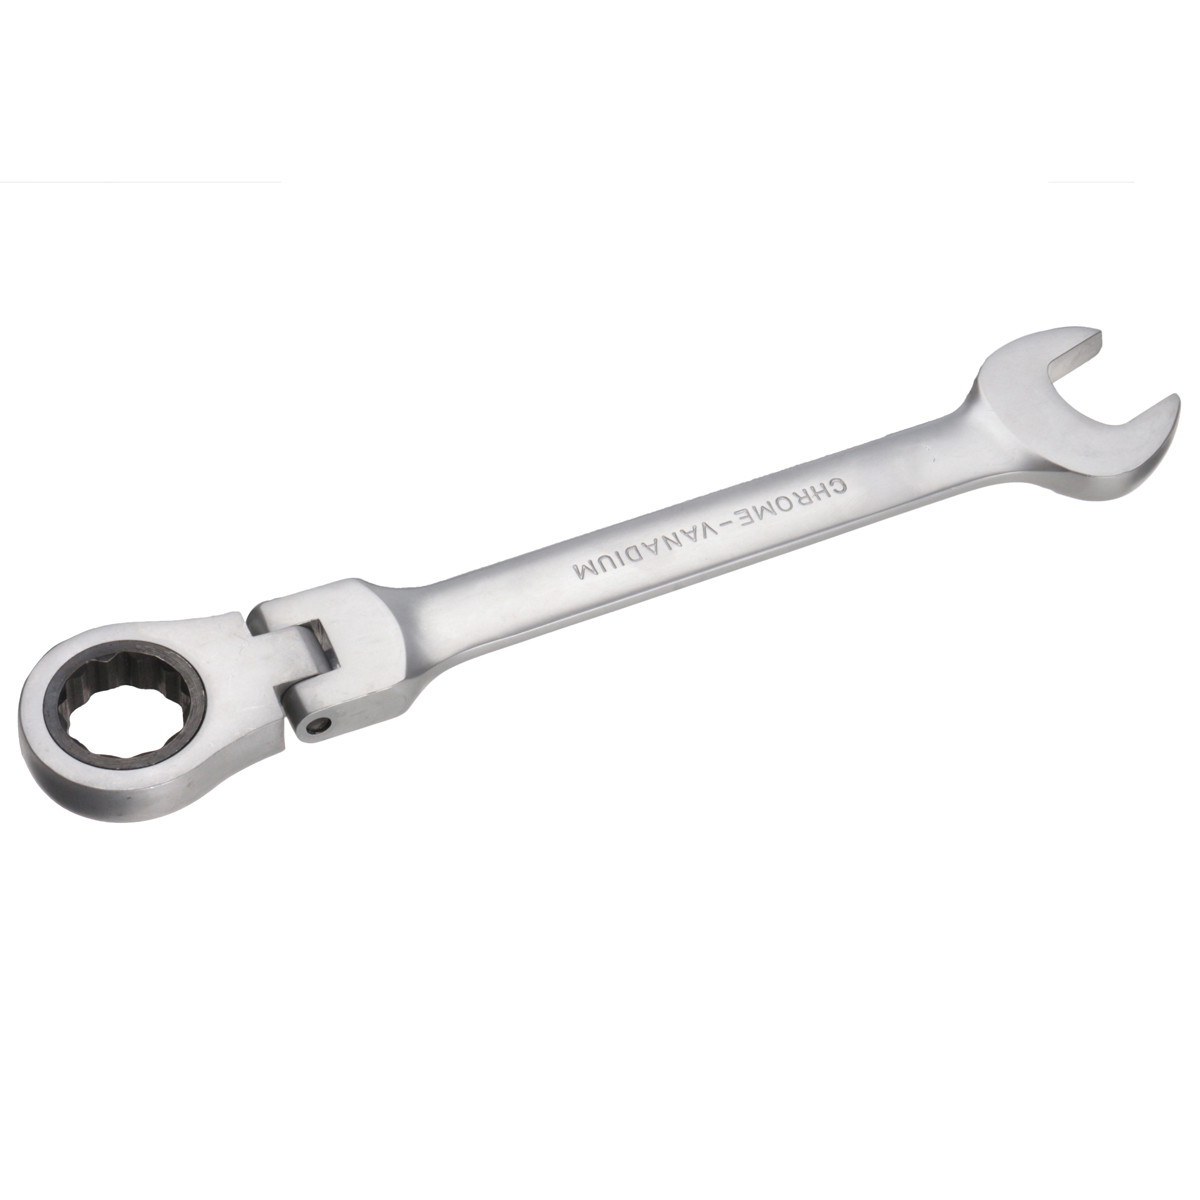 

27 mm CR-V Steel Flexible Head Ratchet Wrench Metric Spanner Open End & Ring Wrenches Tool